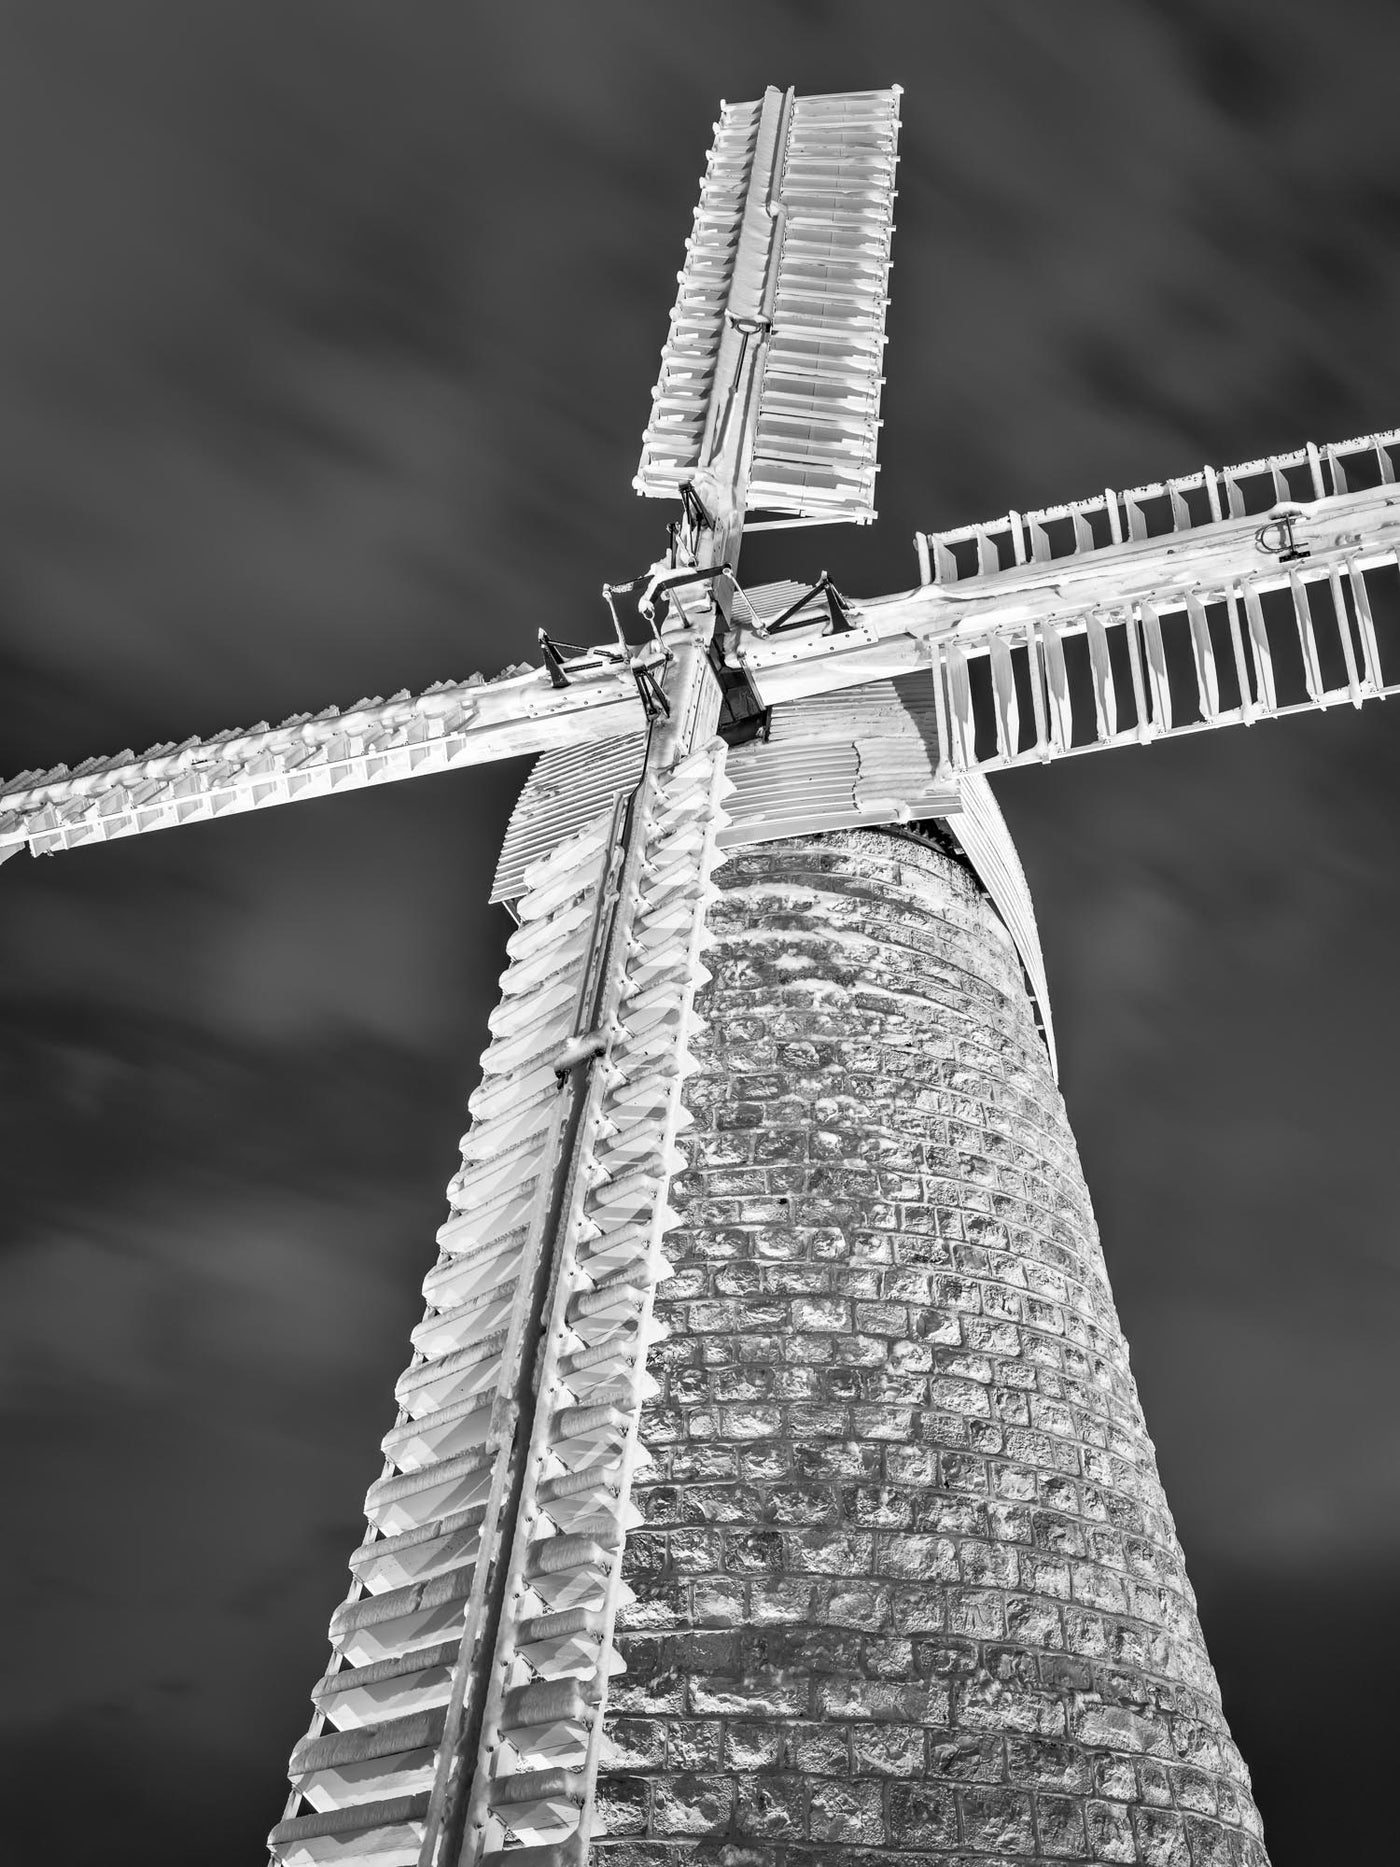 Frozen in Time - By Yehoshua Aryeh - Photograph of Israel - Jerusalem Windmill Covered in Snow